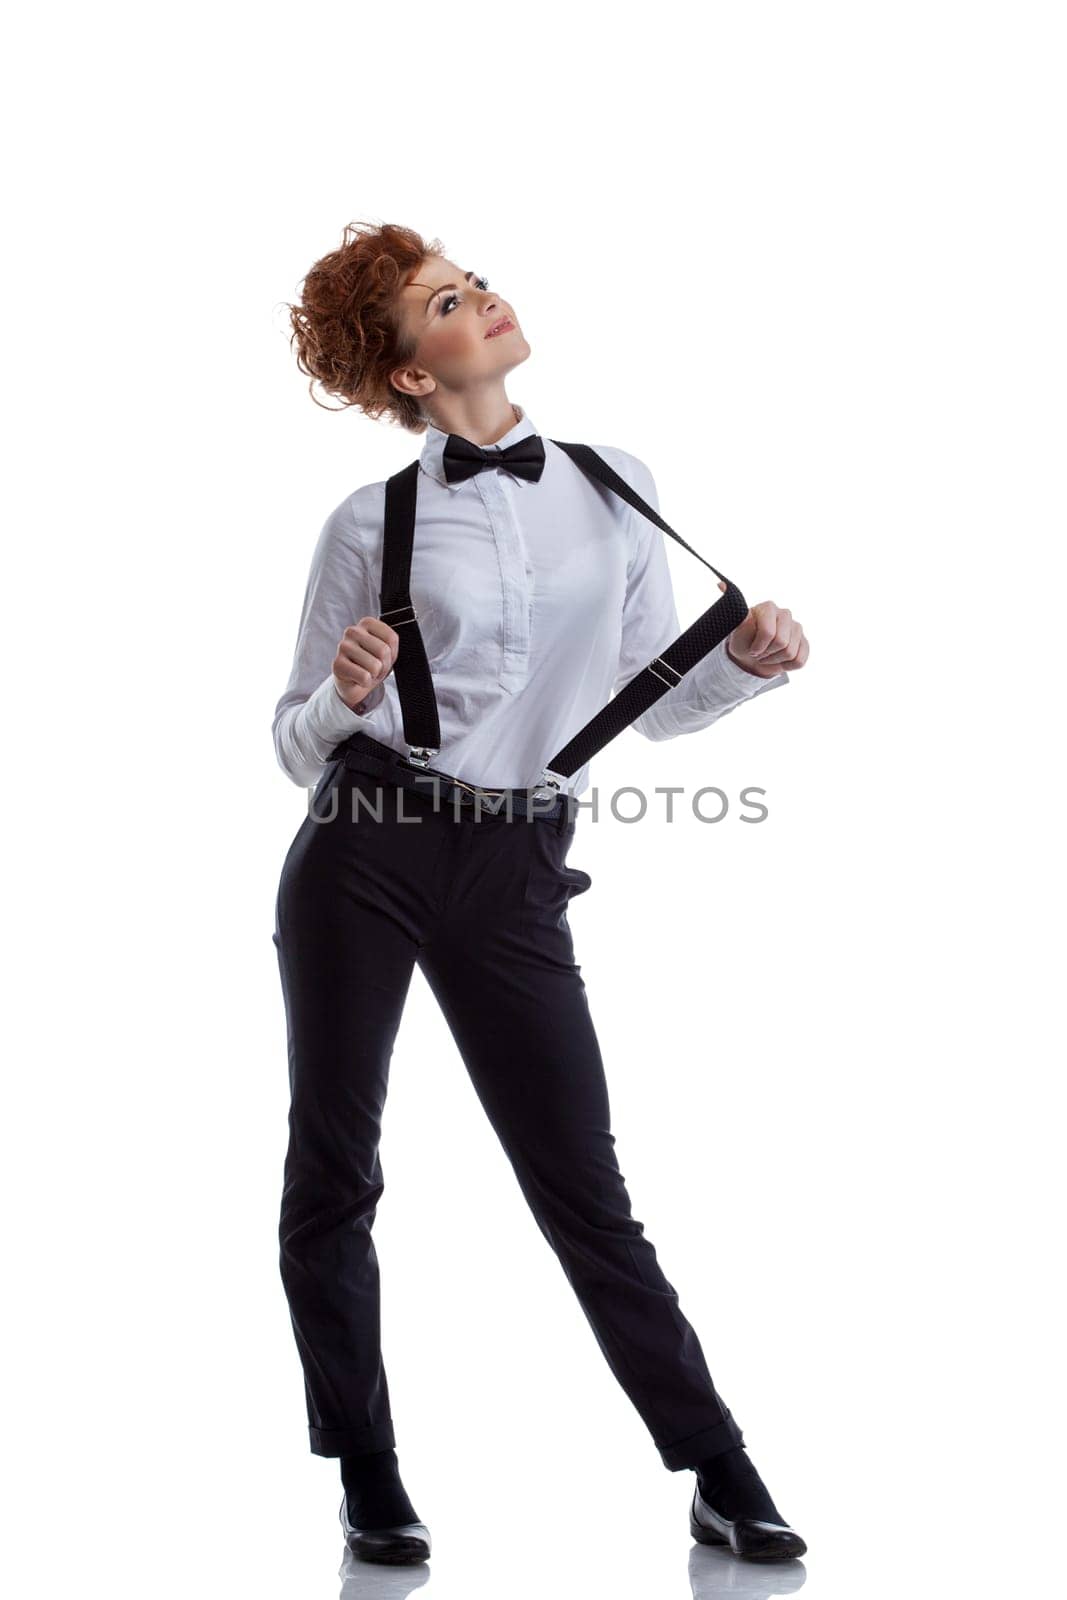 Flirtatious dancer dressed in formal suit. Isolated on white